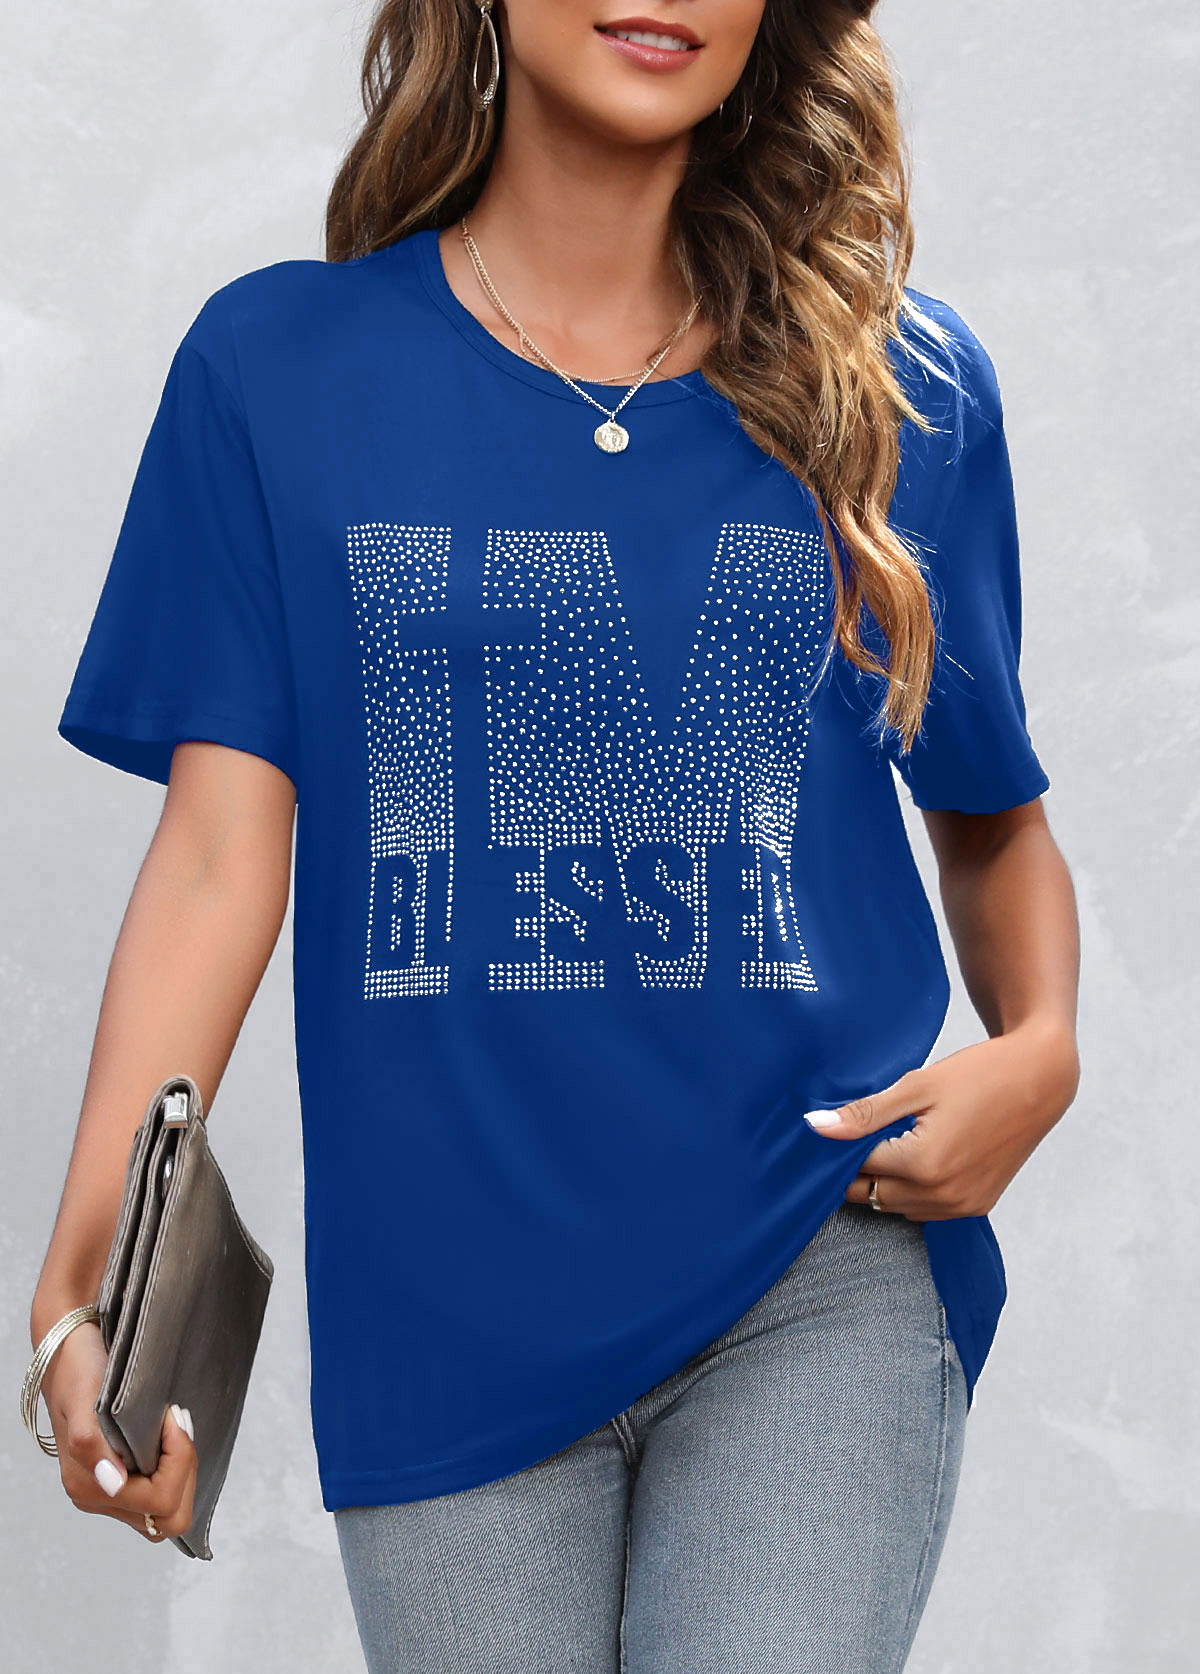 Hot Drilling Blue Round Neck T Shirt